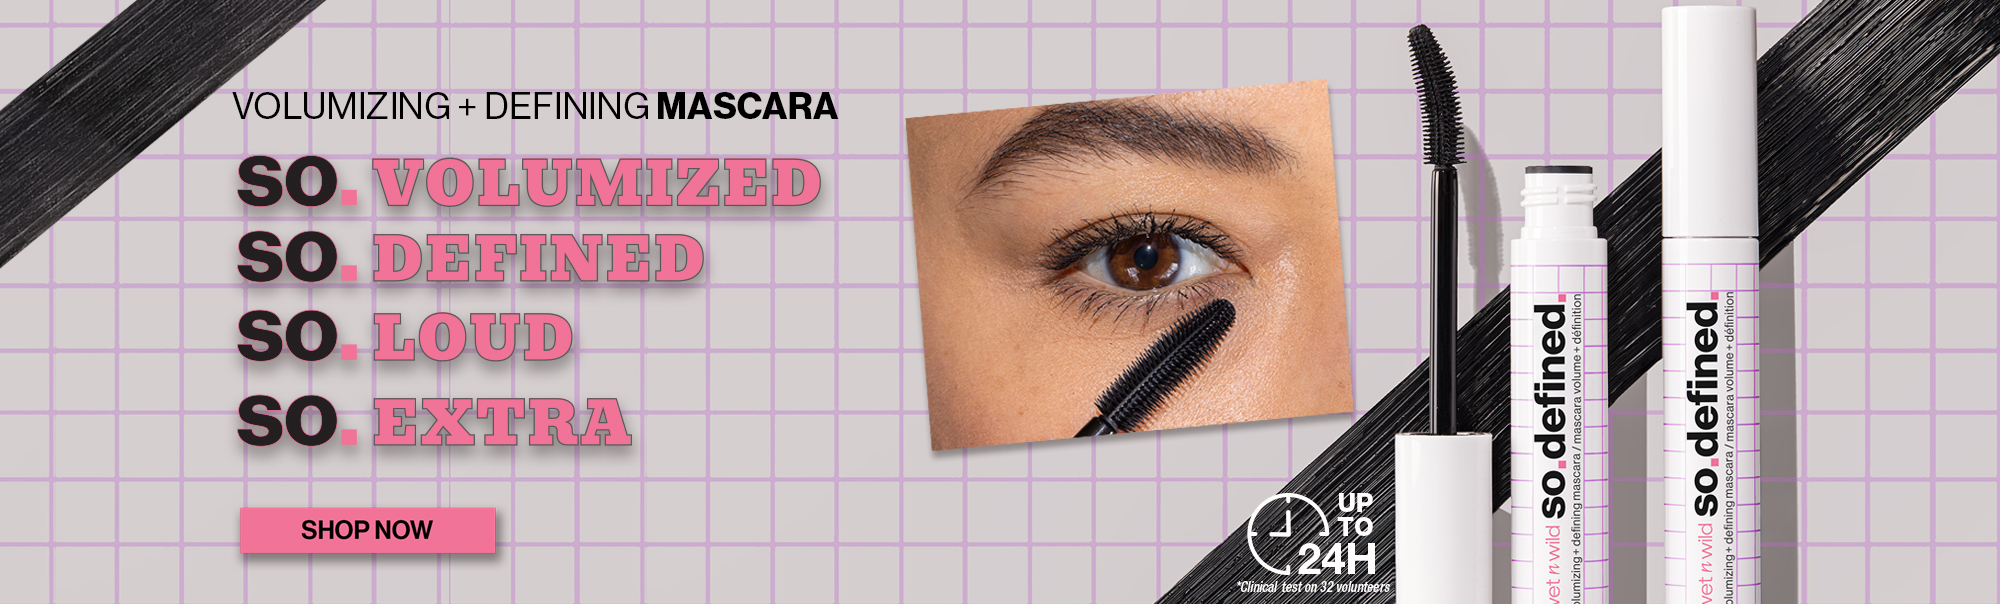 Volumizing and defining mascara. so volumized, so defined, so loud and so extra. Show now. 